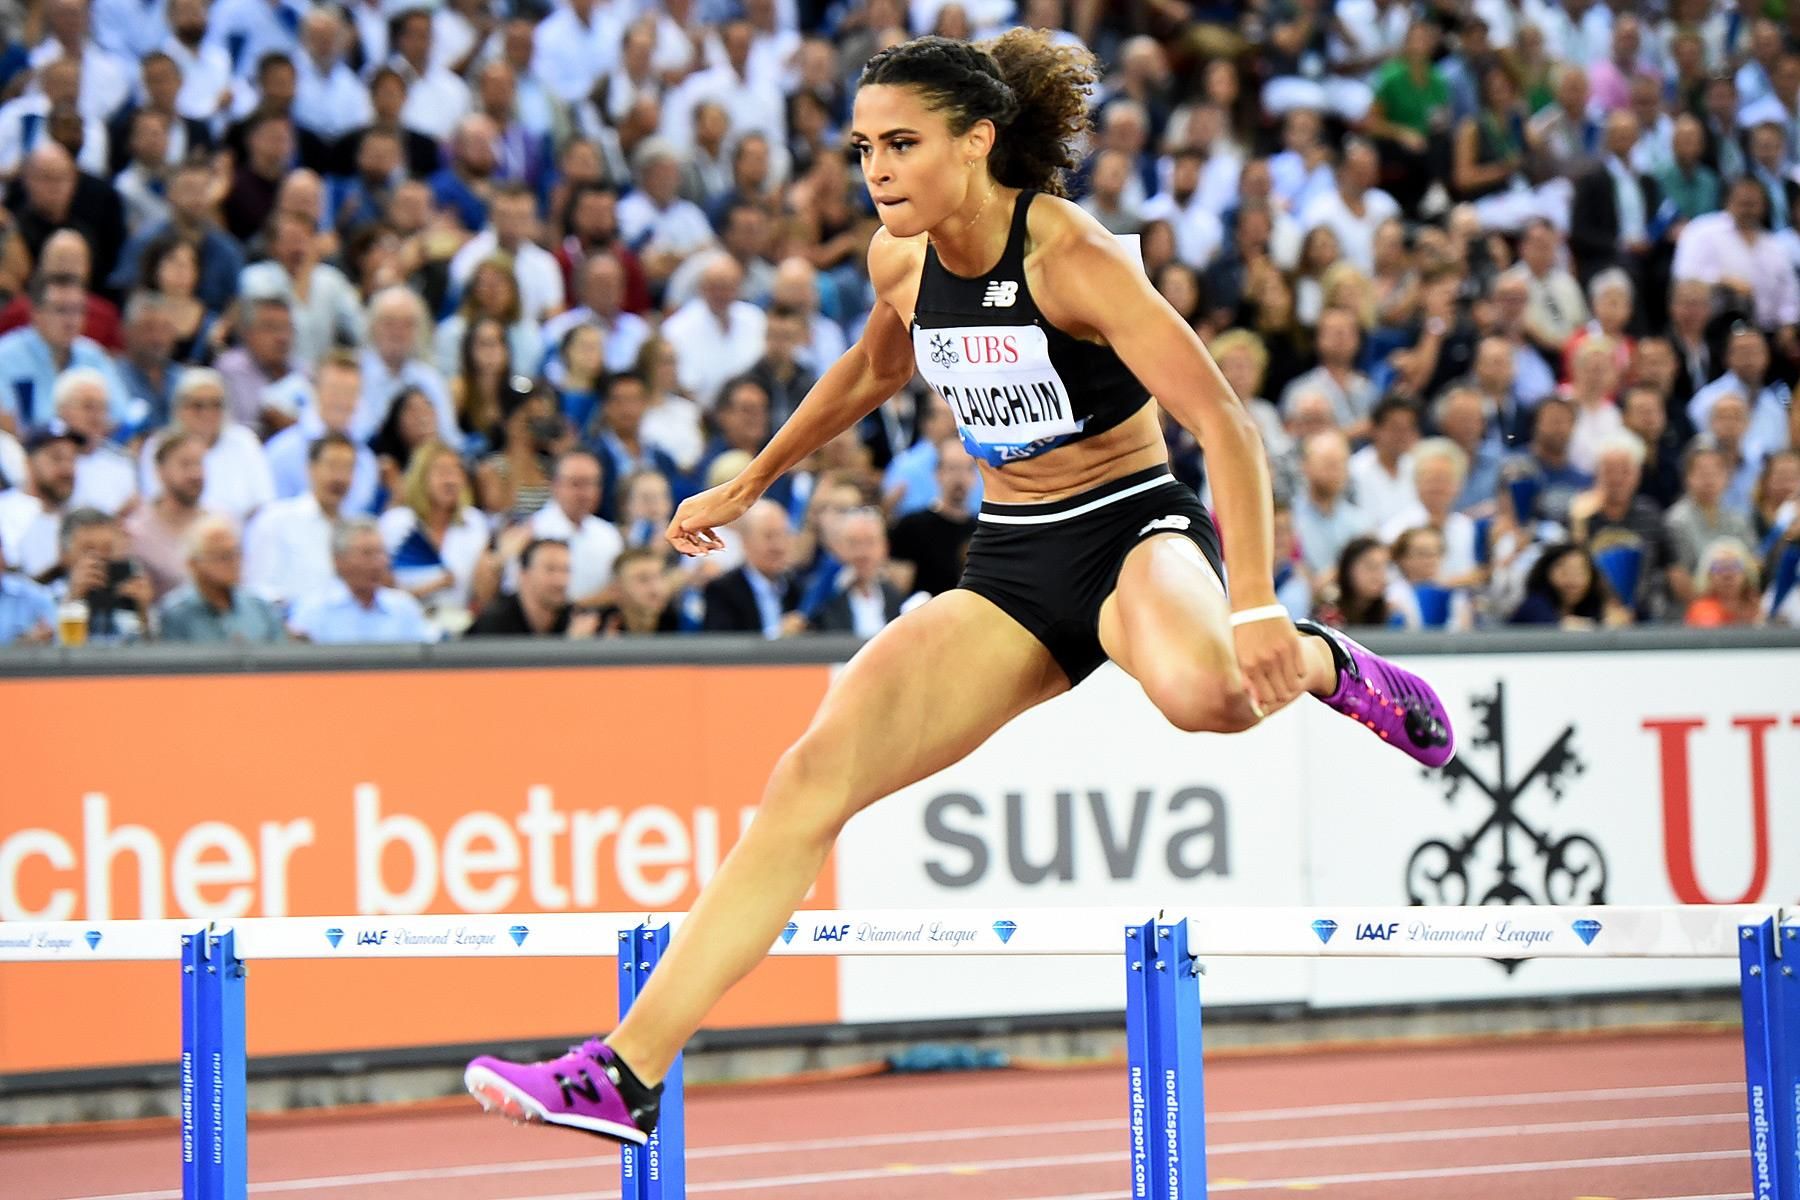 Sydney McLaughlin wins the 400m hurdles at the Diamond League final in Zurich